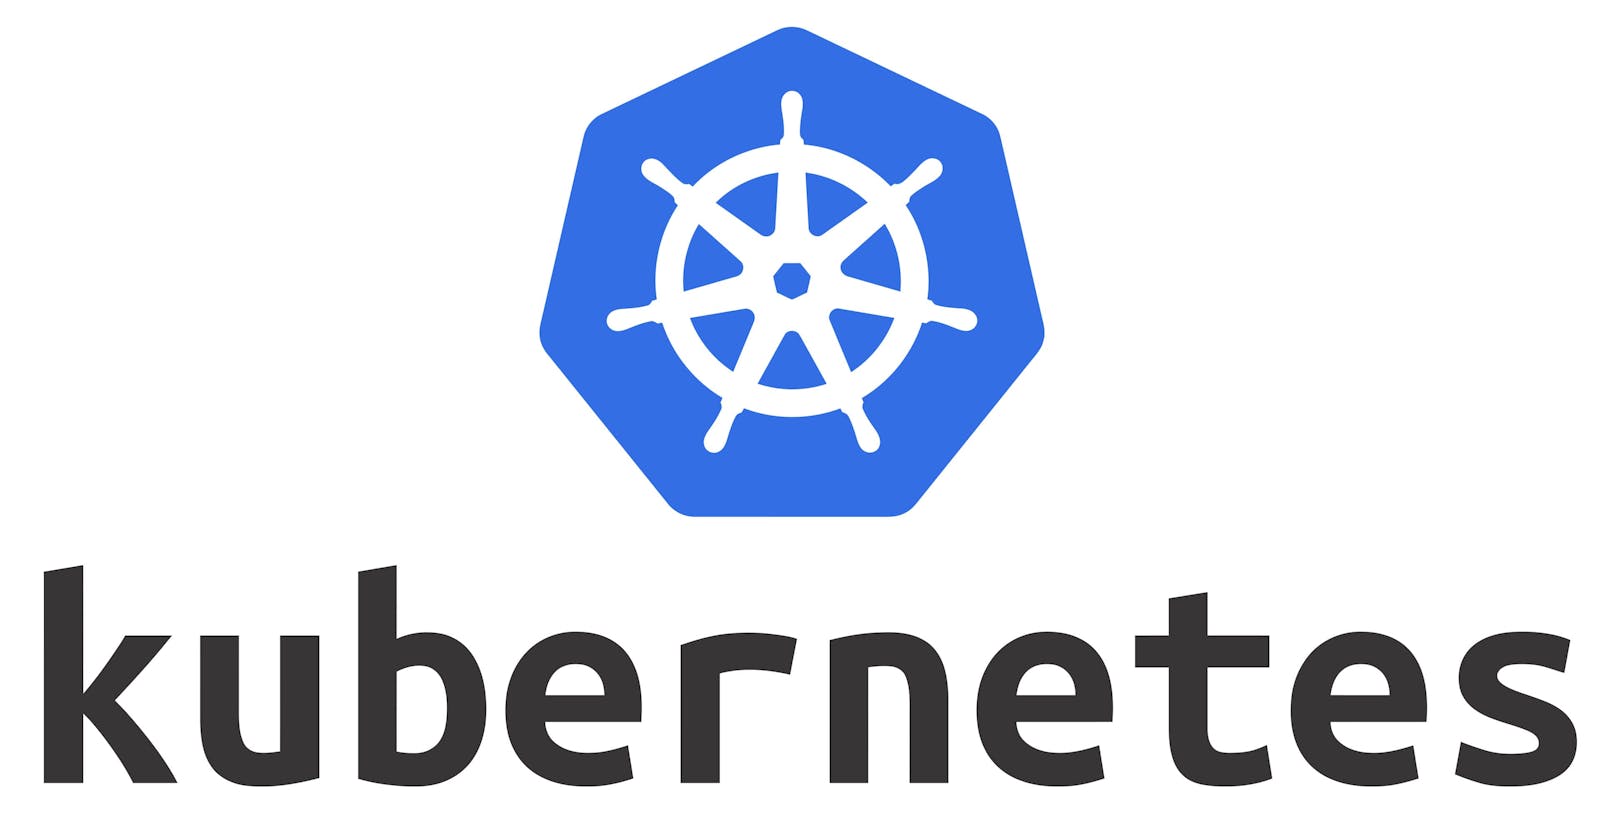 Top 10 Kubernetes CLI commands that are frequently used by DevOps engineers